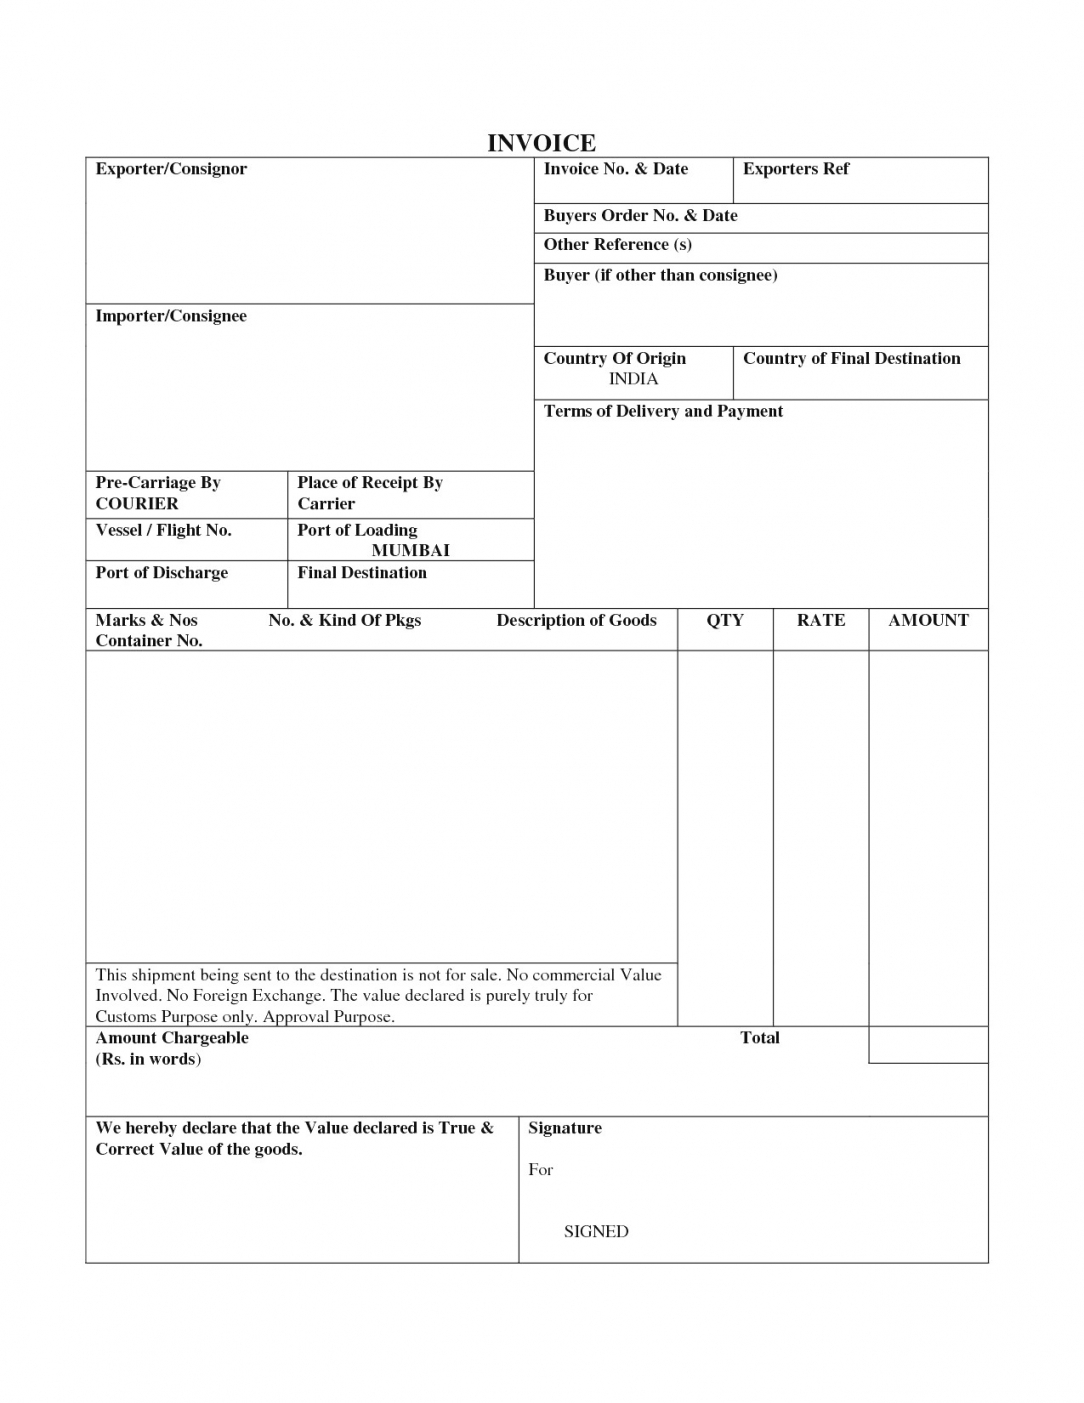 Tax Invoice Template Doc throughout Tax Invoice Template Doc